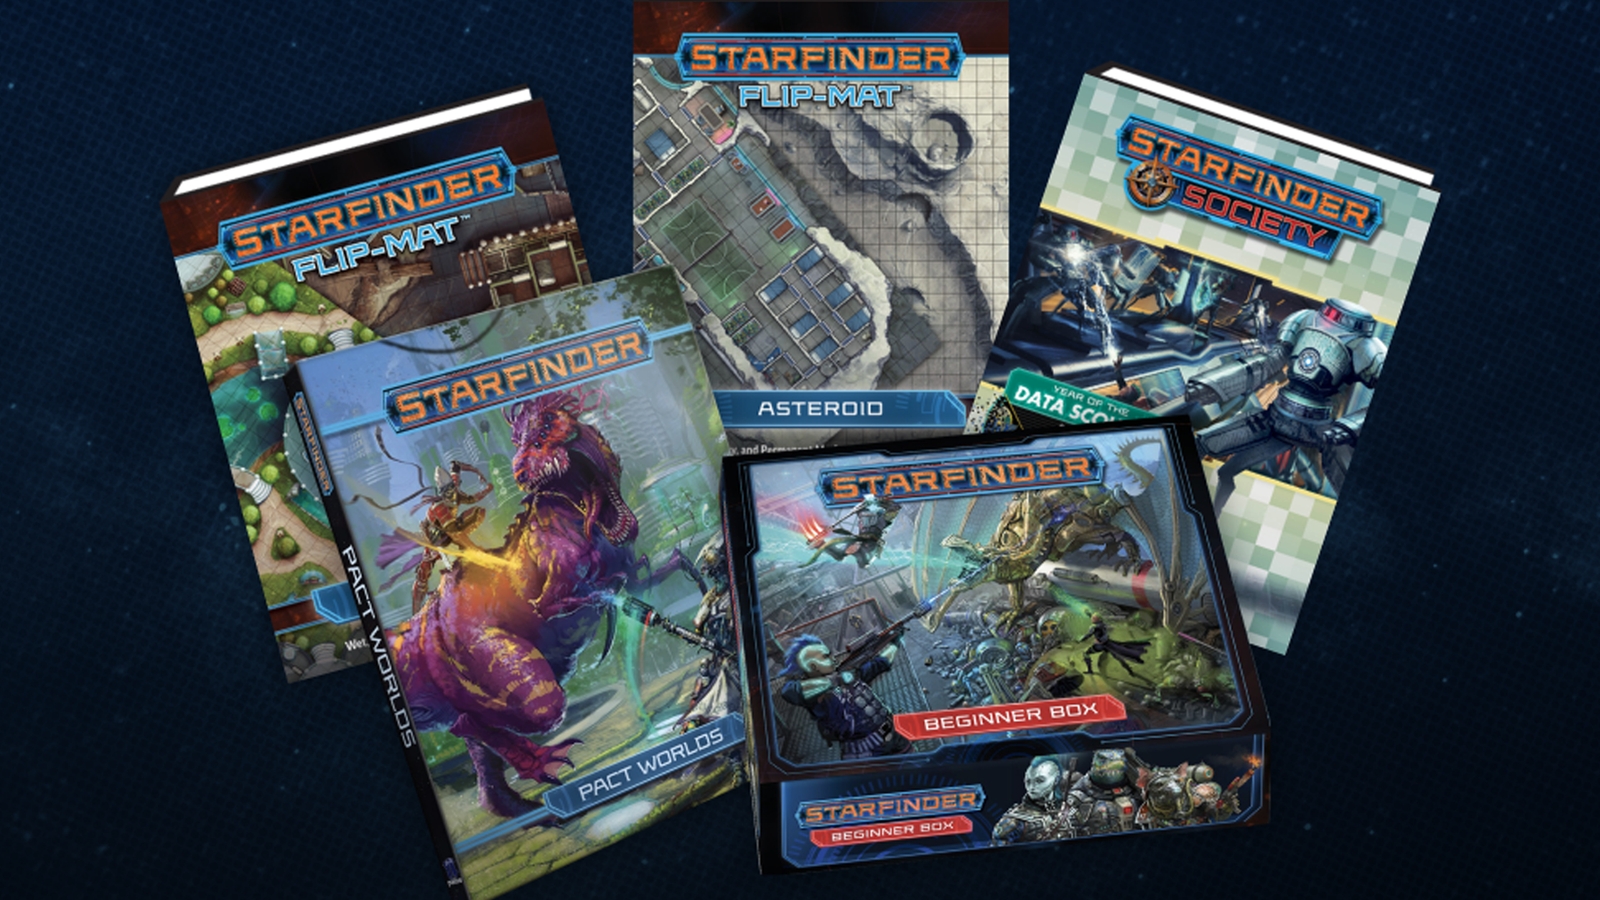 Pathfinder: Get The Ultimate Pathfinder Collection At Humble